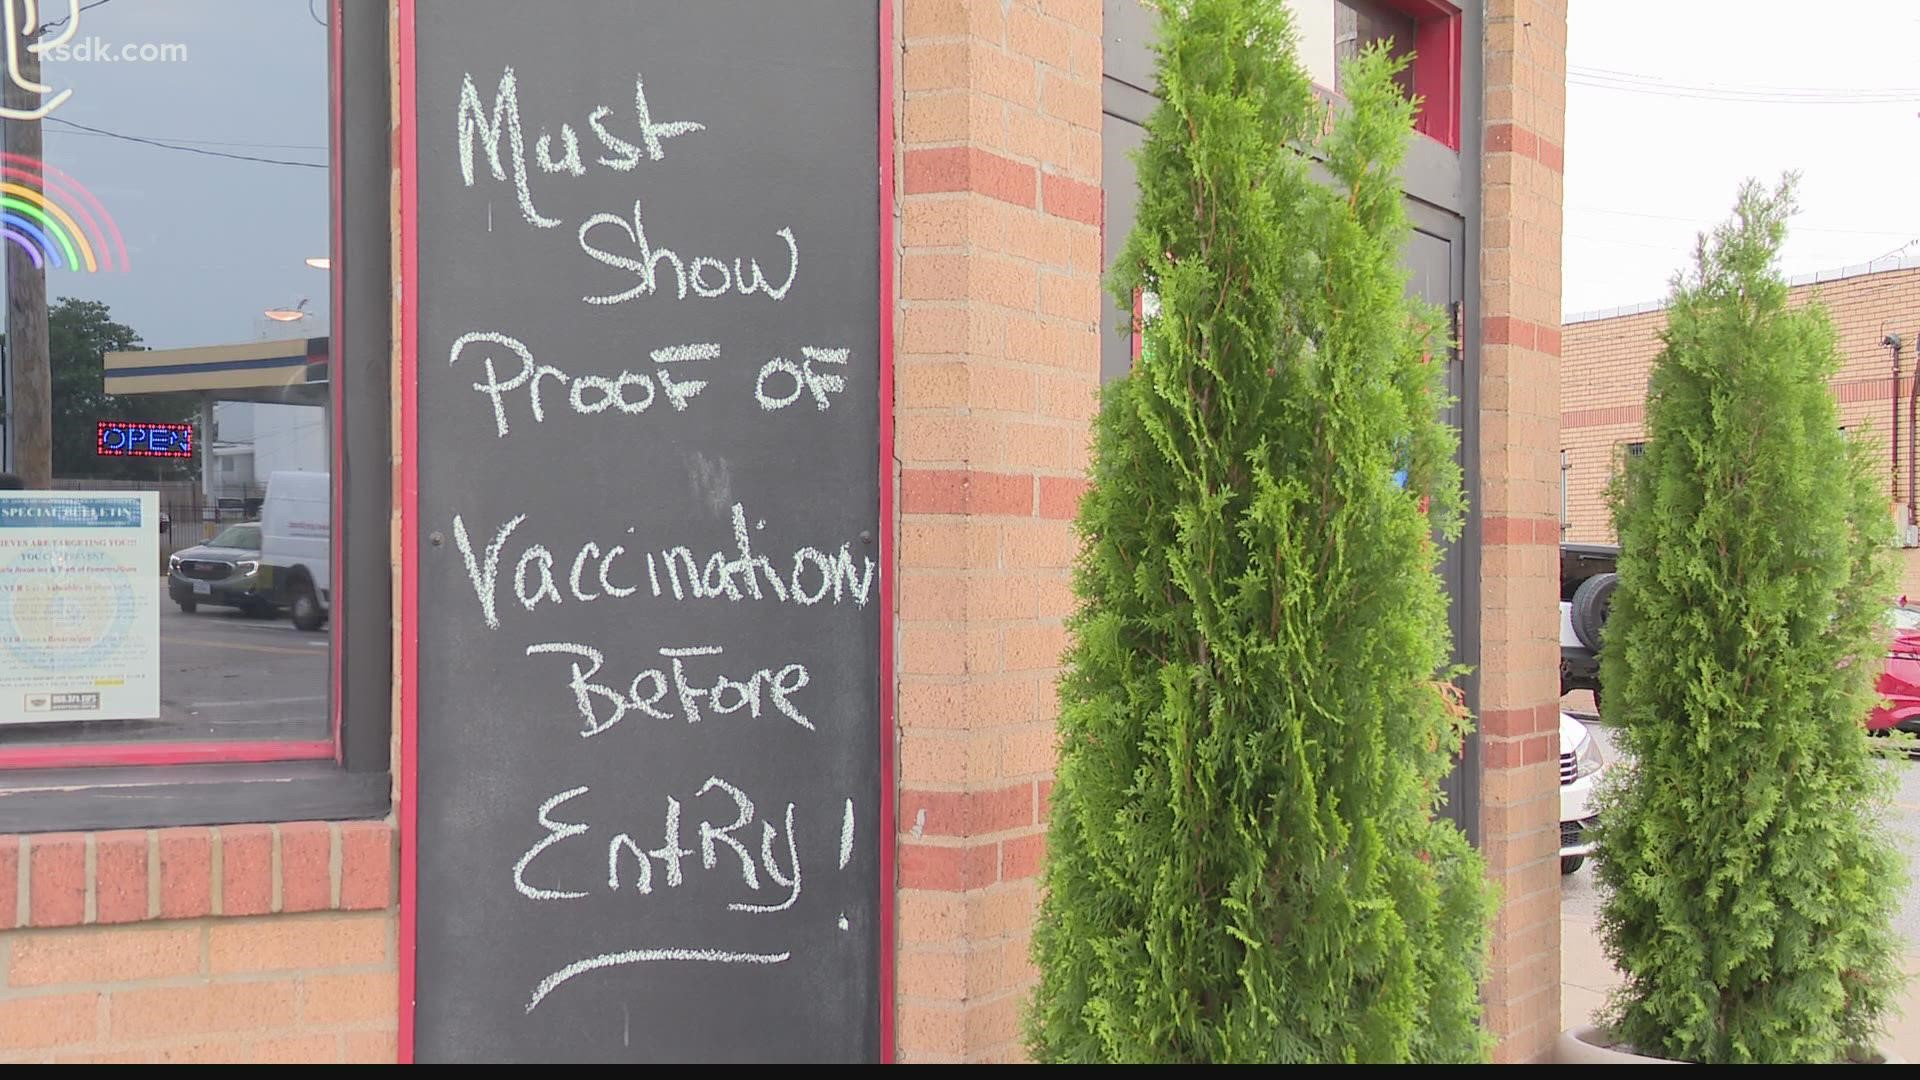 The vaccines have been given emergency use authorization by the FDA, but some Missouri lawmakers want to outlaw businesses from requiring them